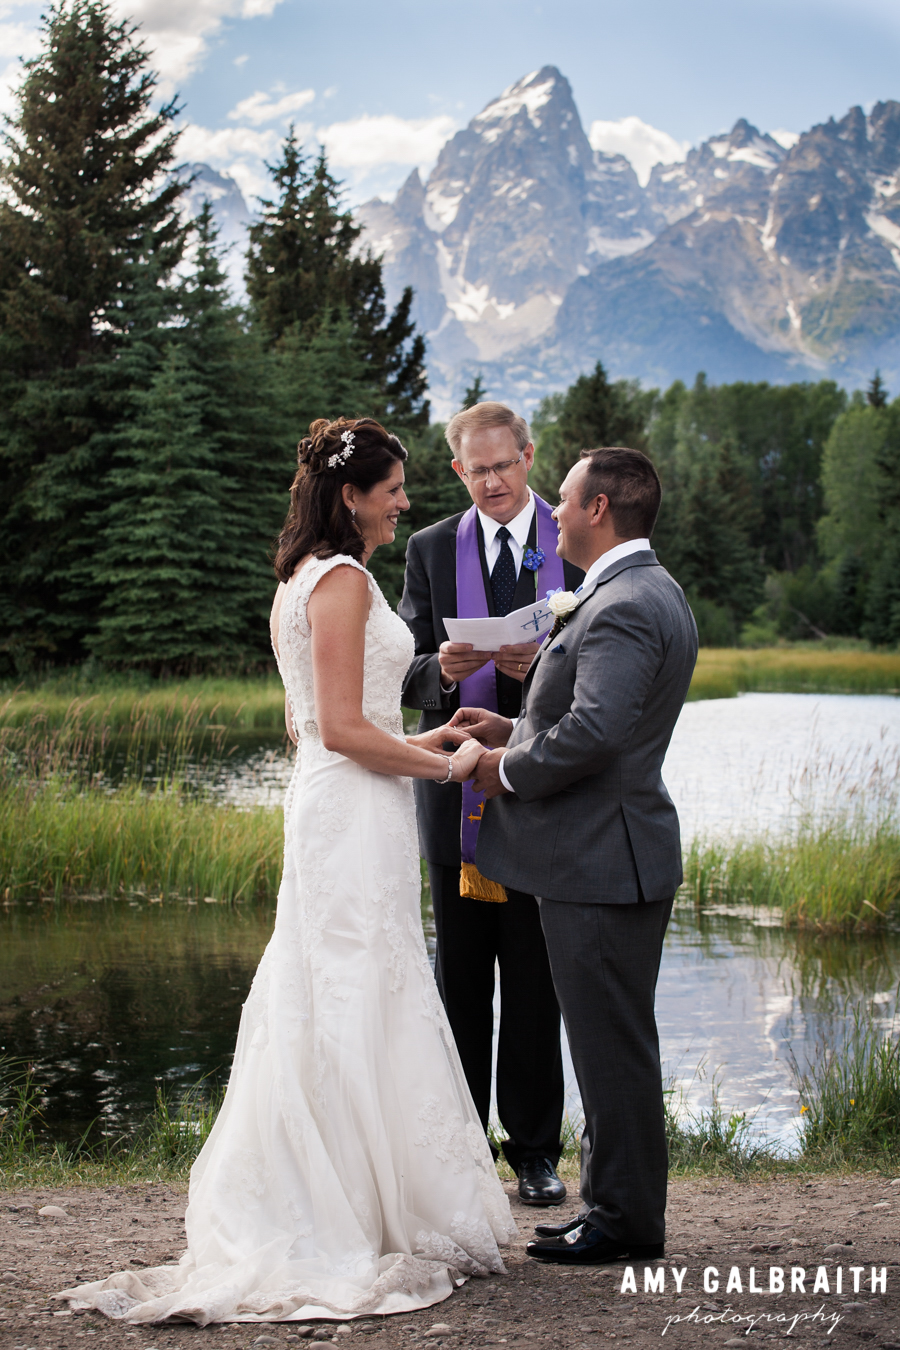 Bride and groom exchange vows during their Grand Teton wedding ceremony at Schwabacher's Landing